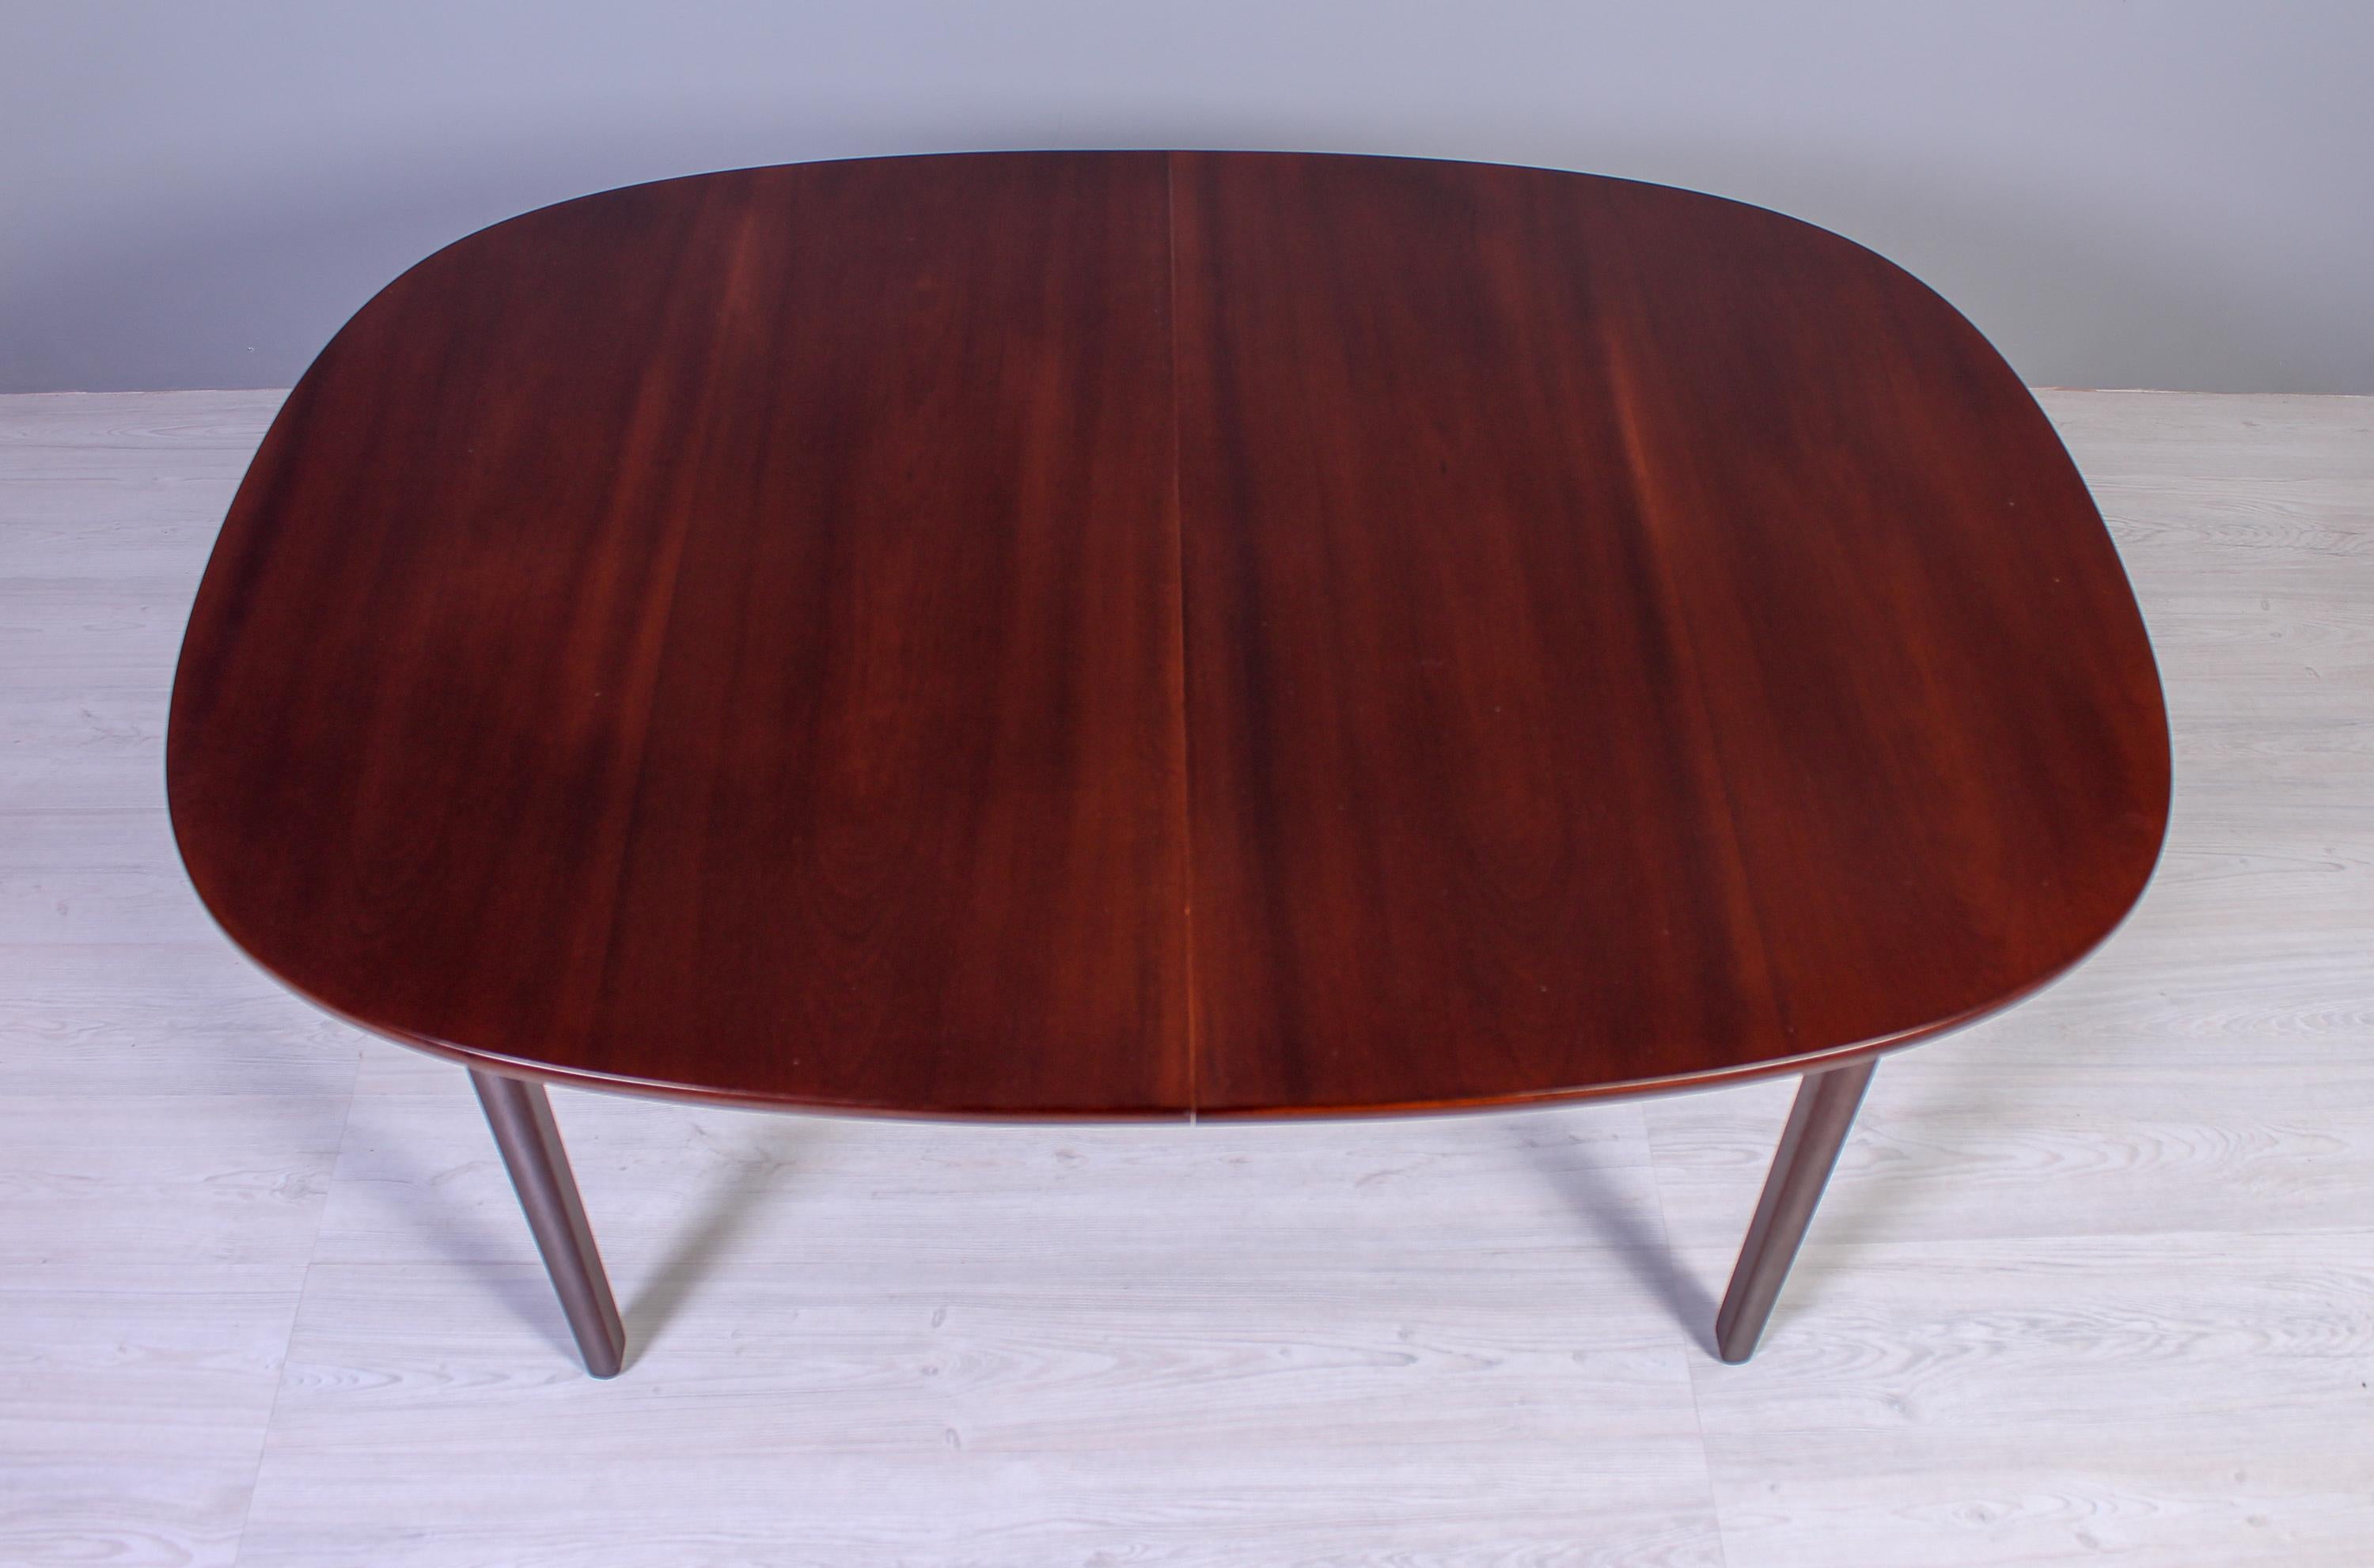 Danish Ole Wanscher Mahogany Rungstedlund Dining Table, 1960s For Sale